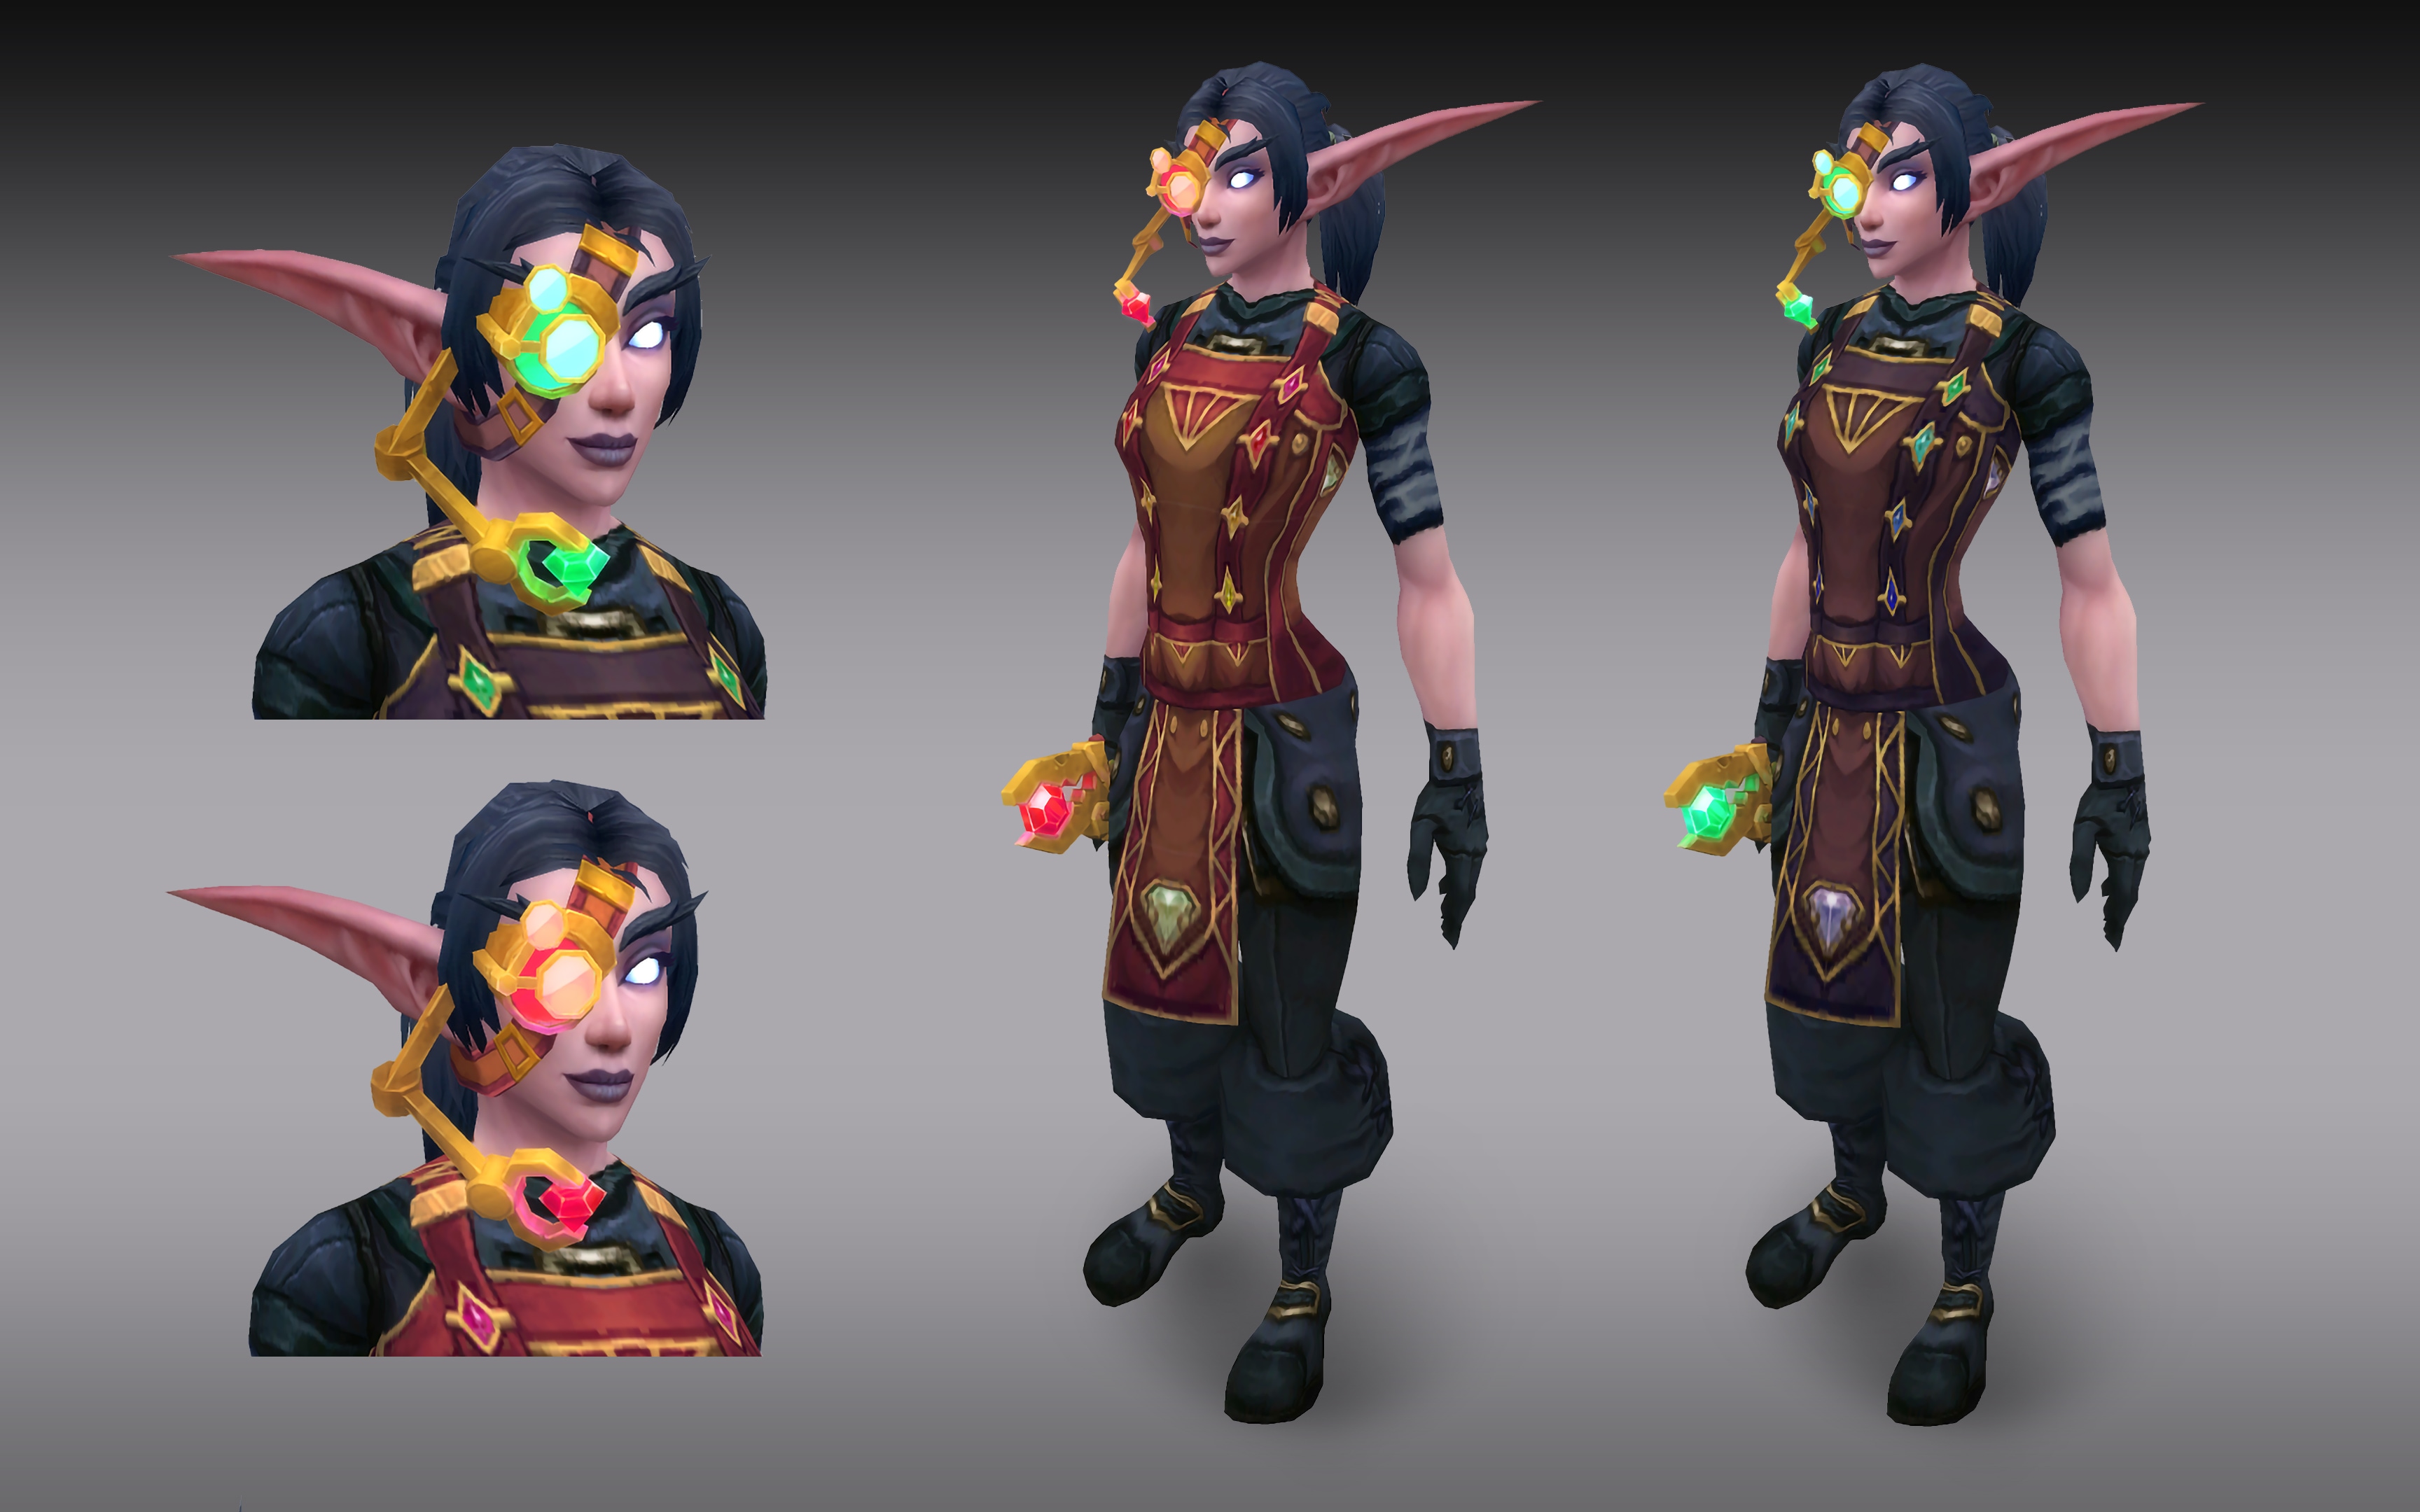 Close up view of two Jewelcrafting head-pieces (green and red gemmed) worn by a night elf. Two more full-length views (red and green gemmed) of a night elf wearing the head pieces, holding the Jewelcrafting tools and wearing a Jewelcrafting apron. 